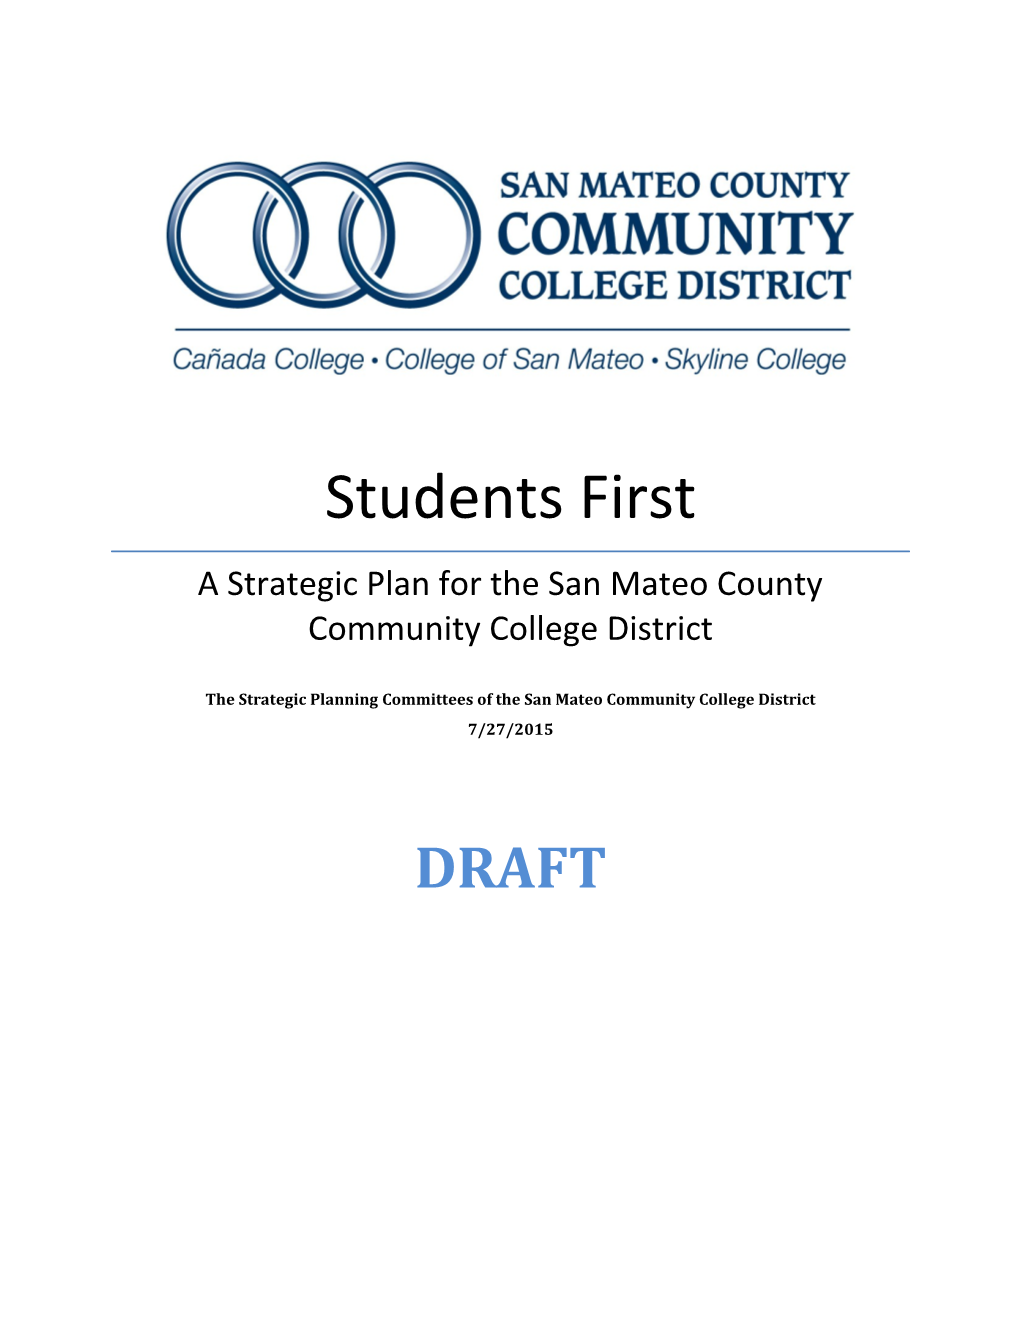 The Strategic Planning Committees of the San Mateo Community College District